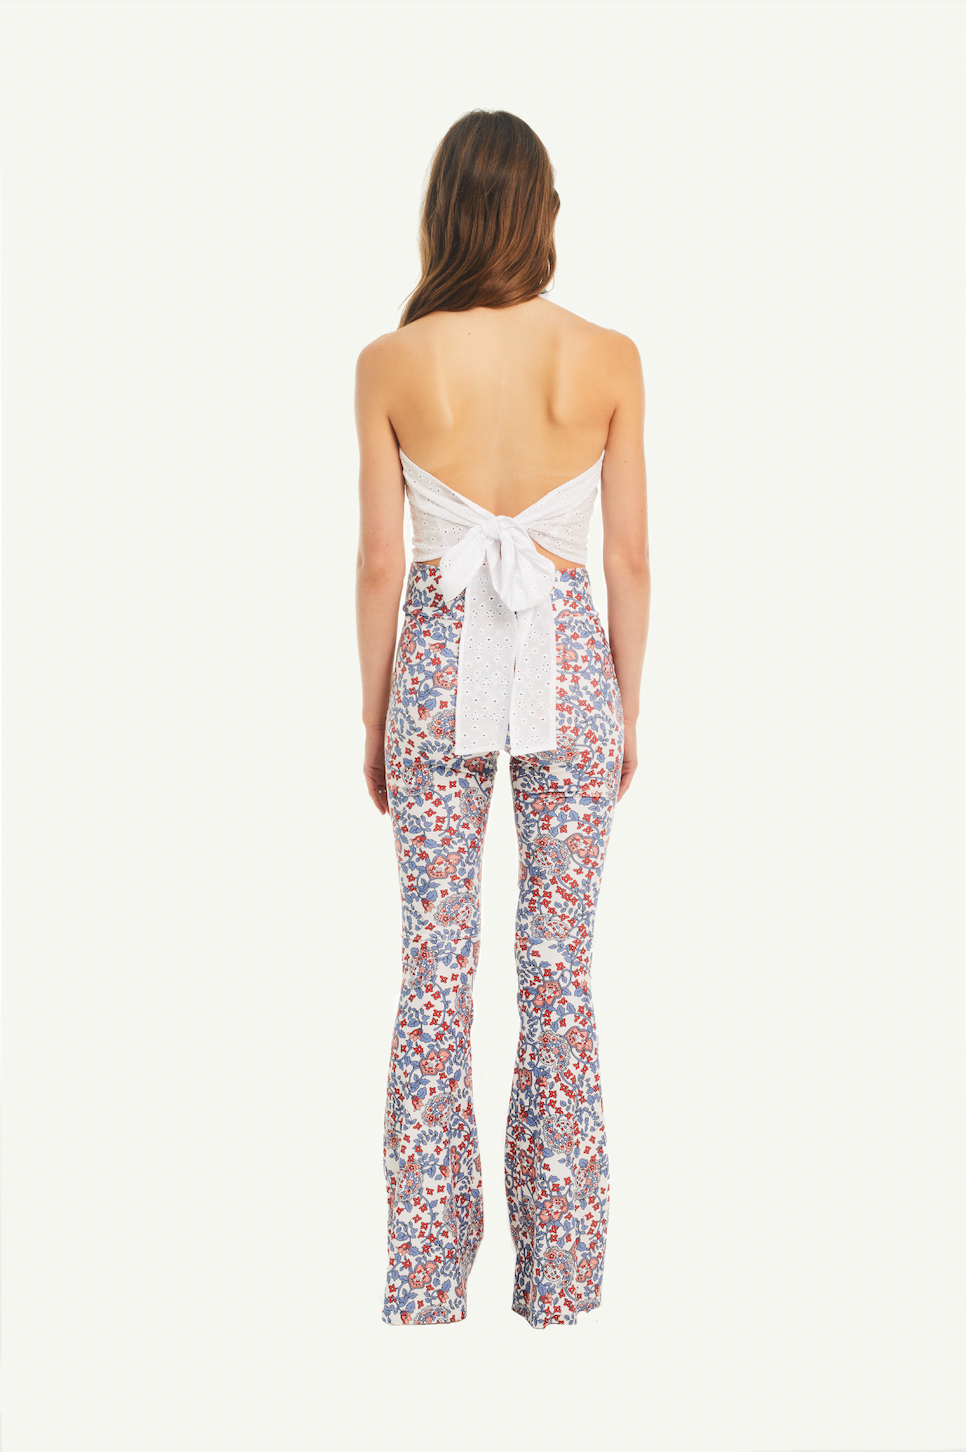 ORCHIDEA - blouse with front volant and nude back in cotton Mirabel print